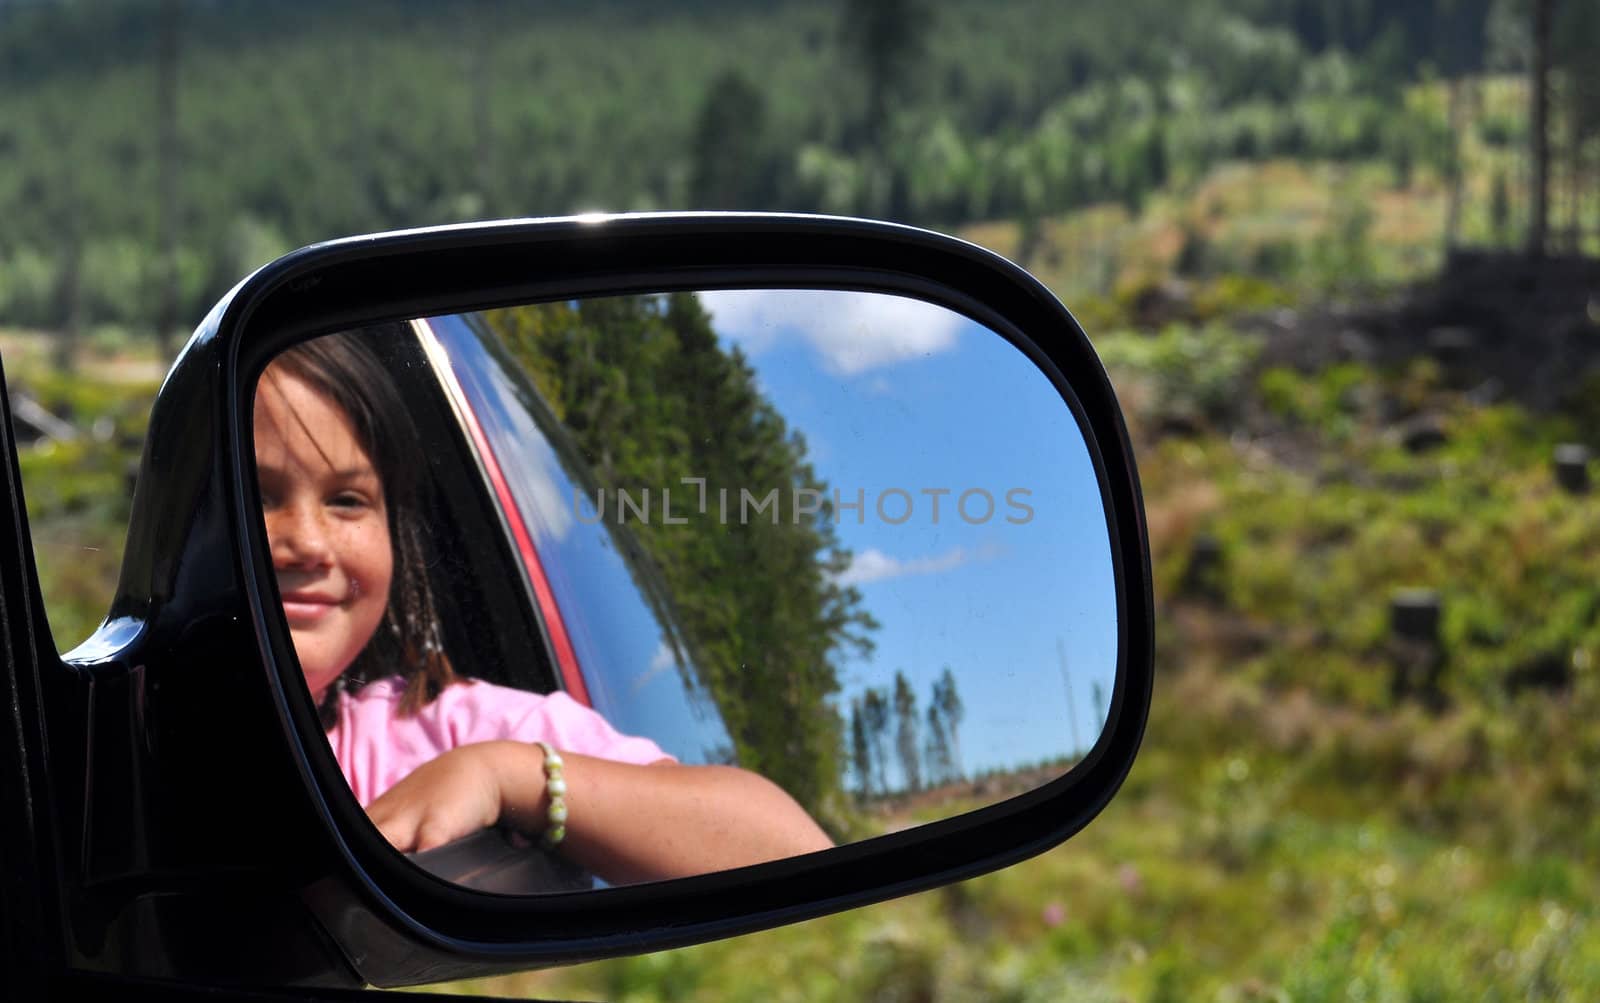 A young girl seen in a rear view mirror on a trip in rural environment.
